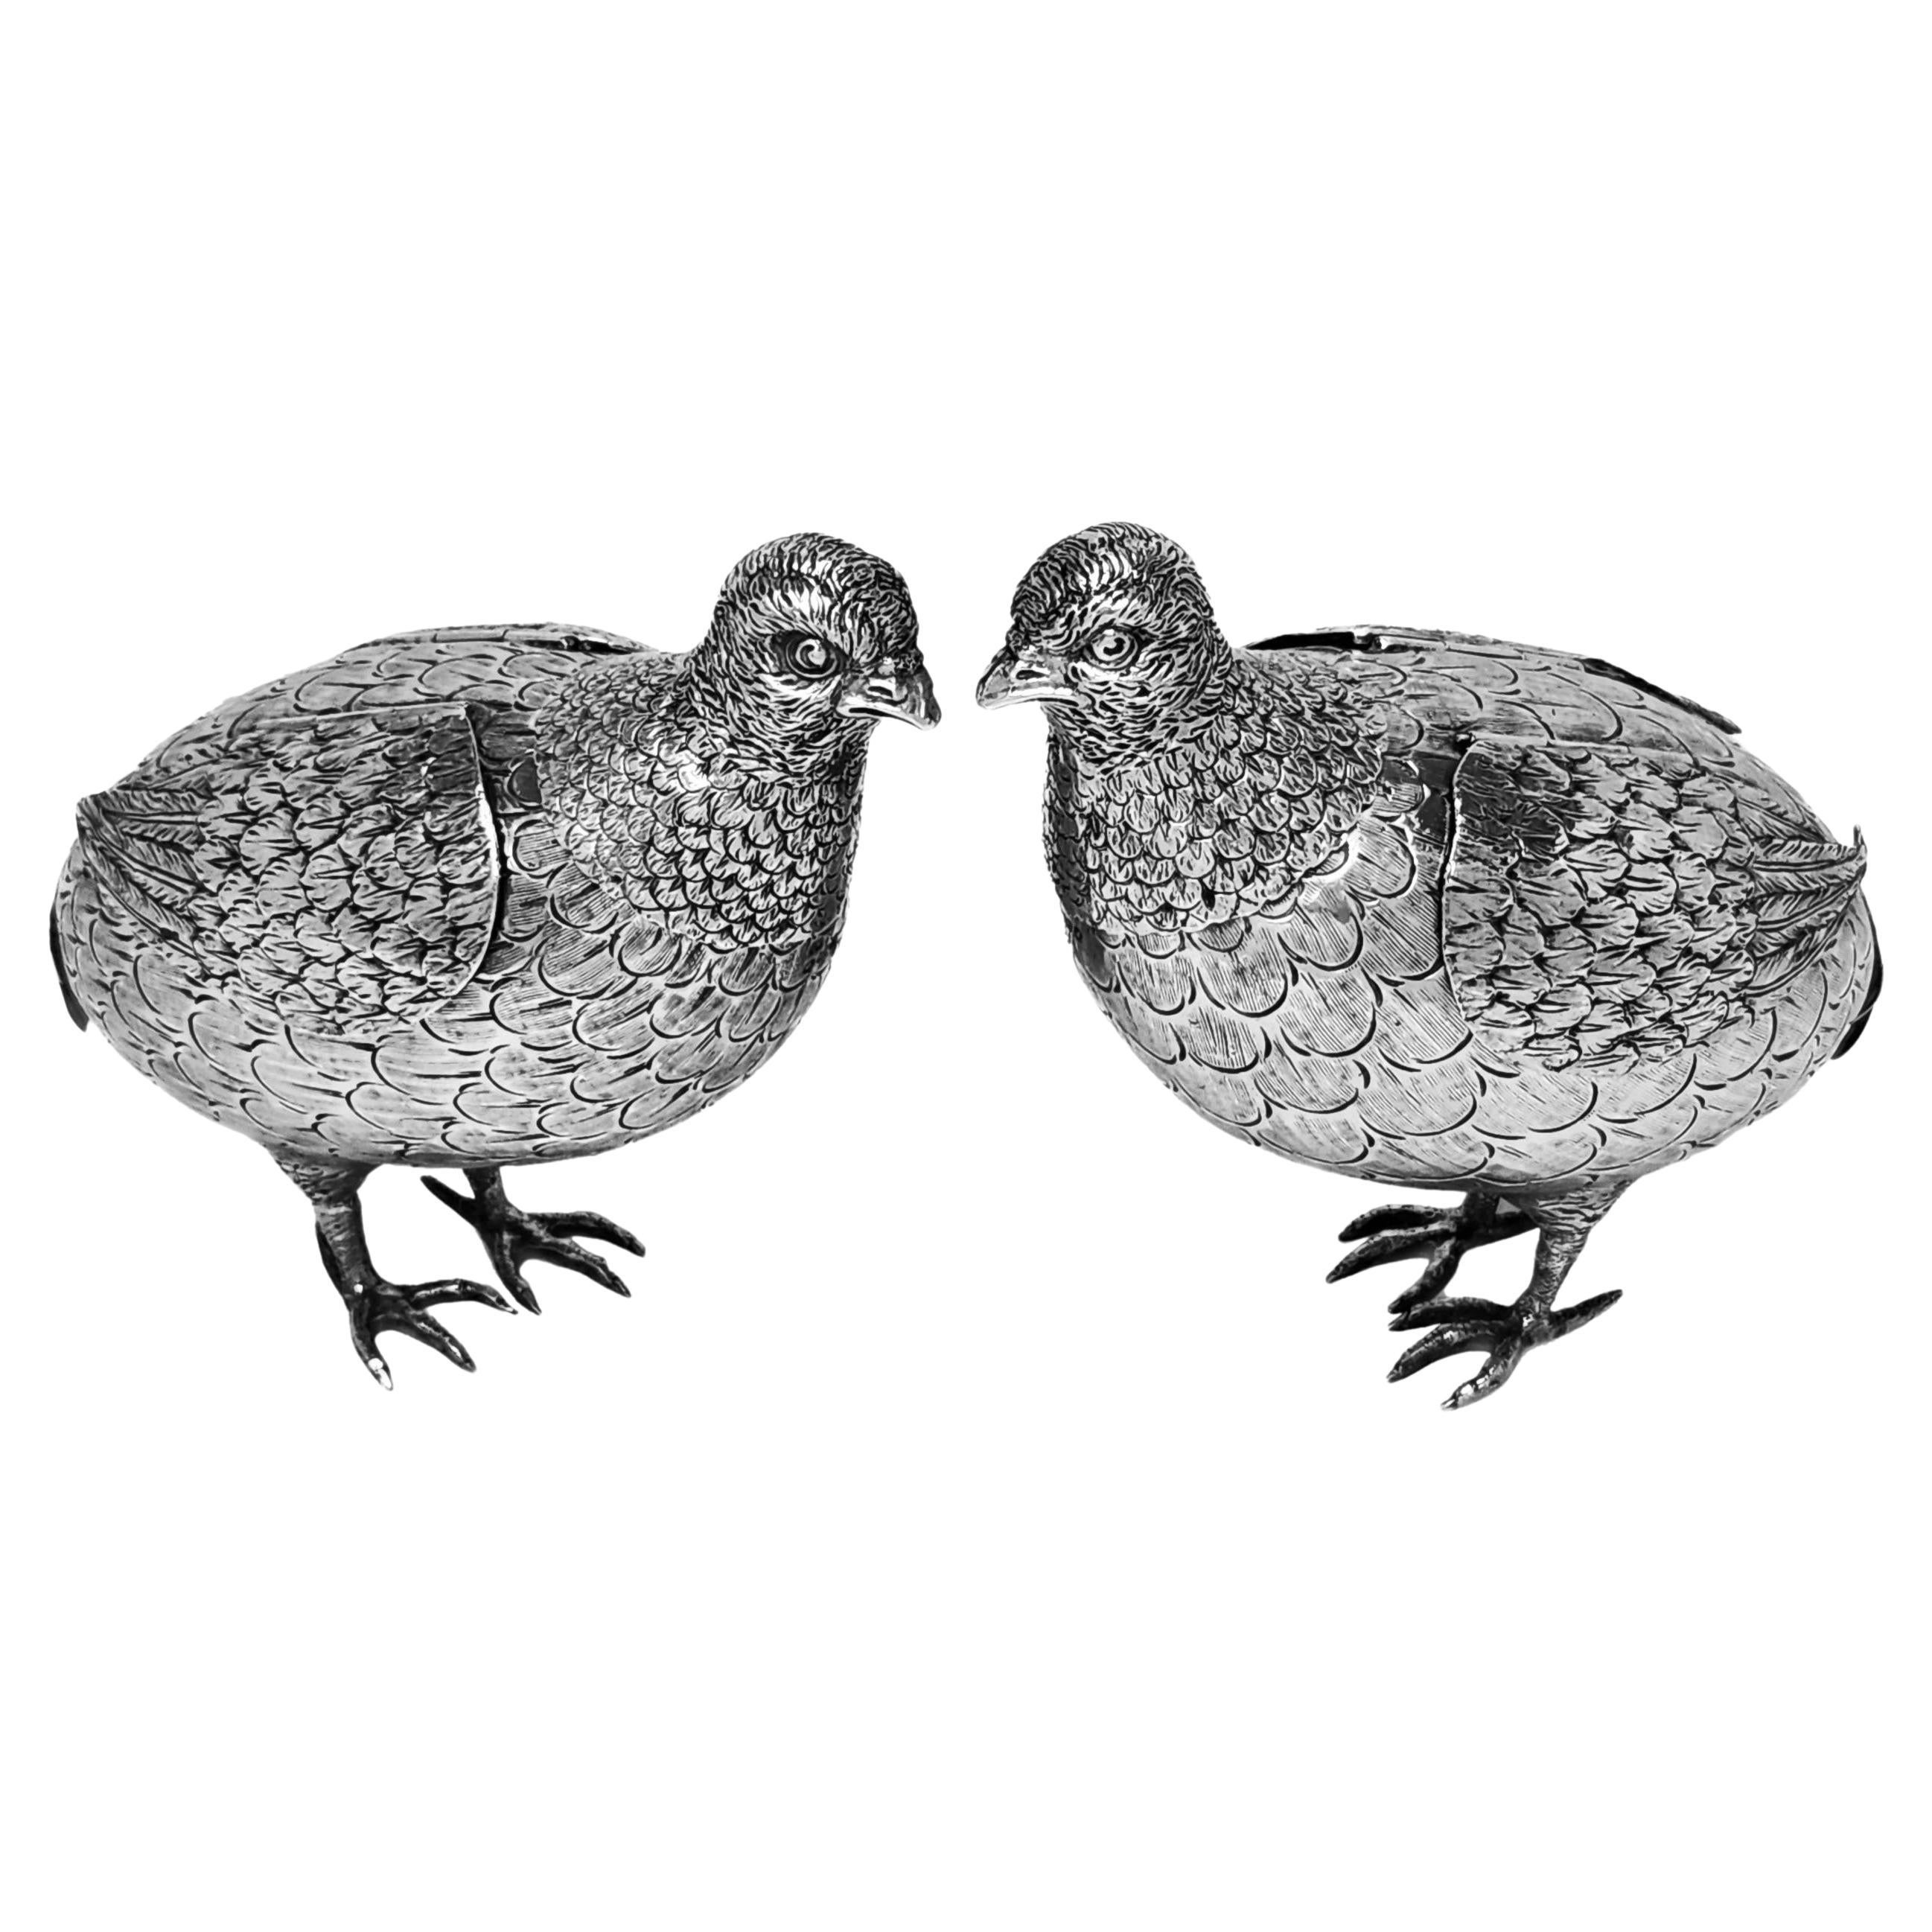 pair Antique German Silver Grouse Bird Models Chester English Import Mark 1909 For Sale